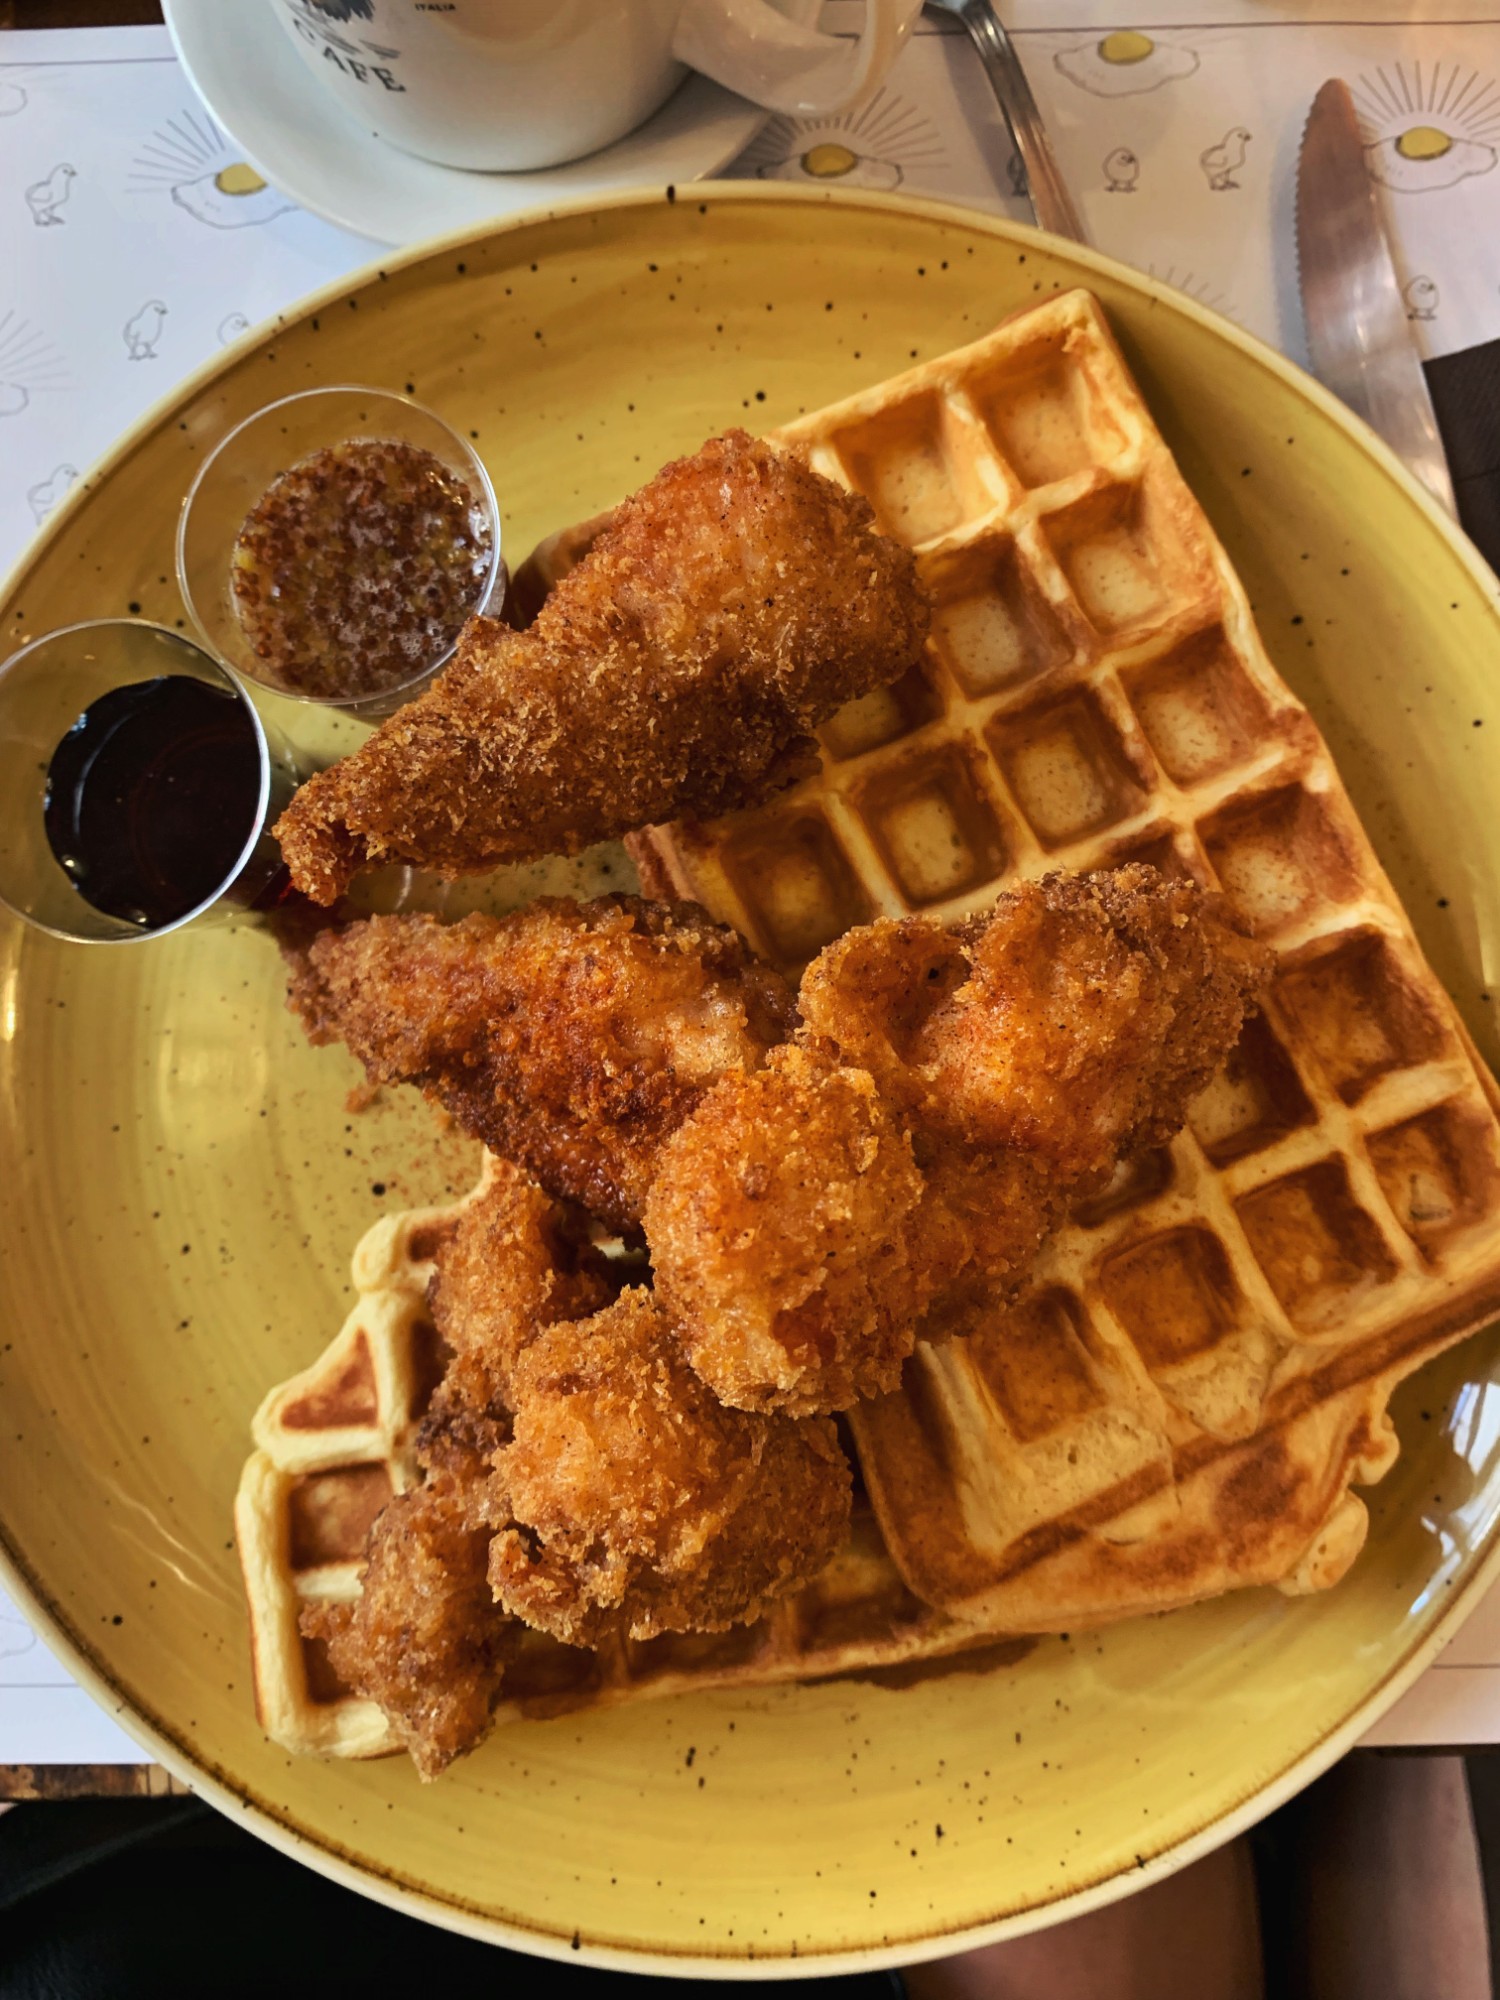 Chicken and waffles brunch in Florence